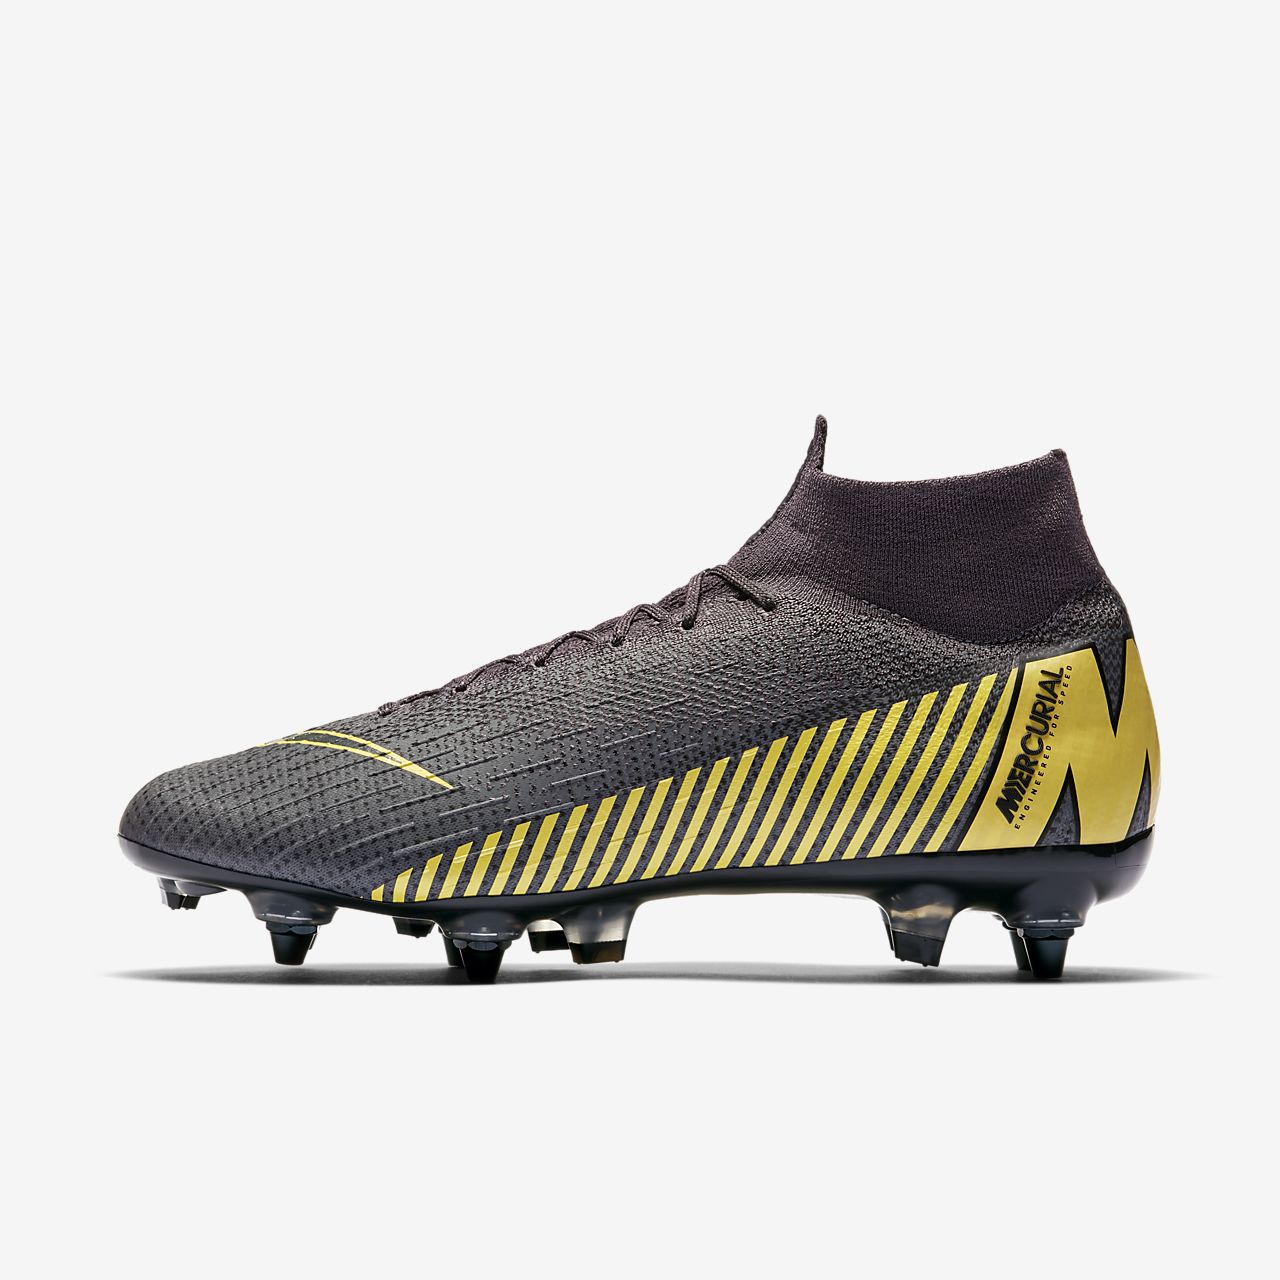 34 Best Nike Mercurial Superfly V AG Pro images in 2018